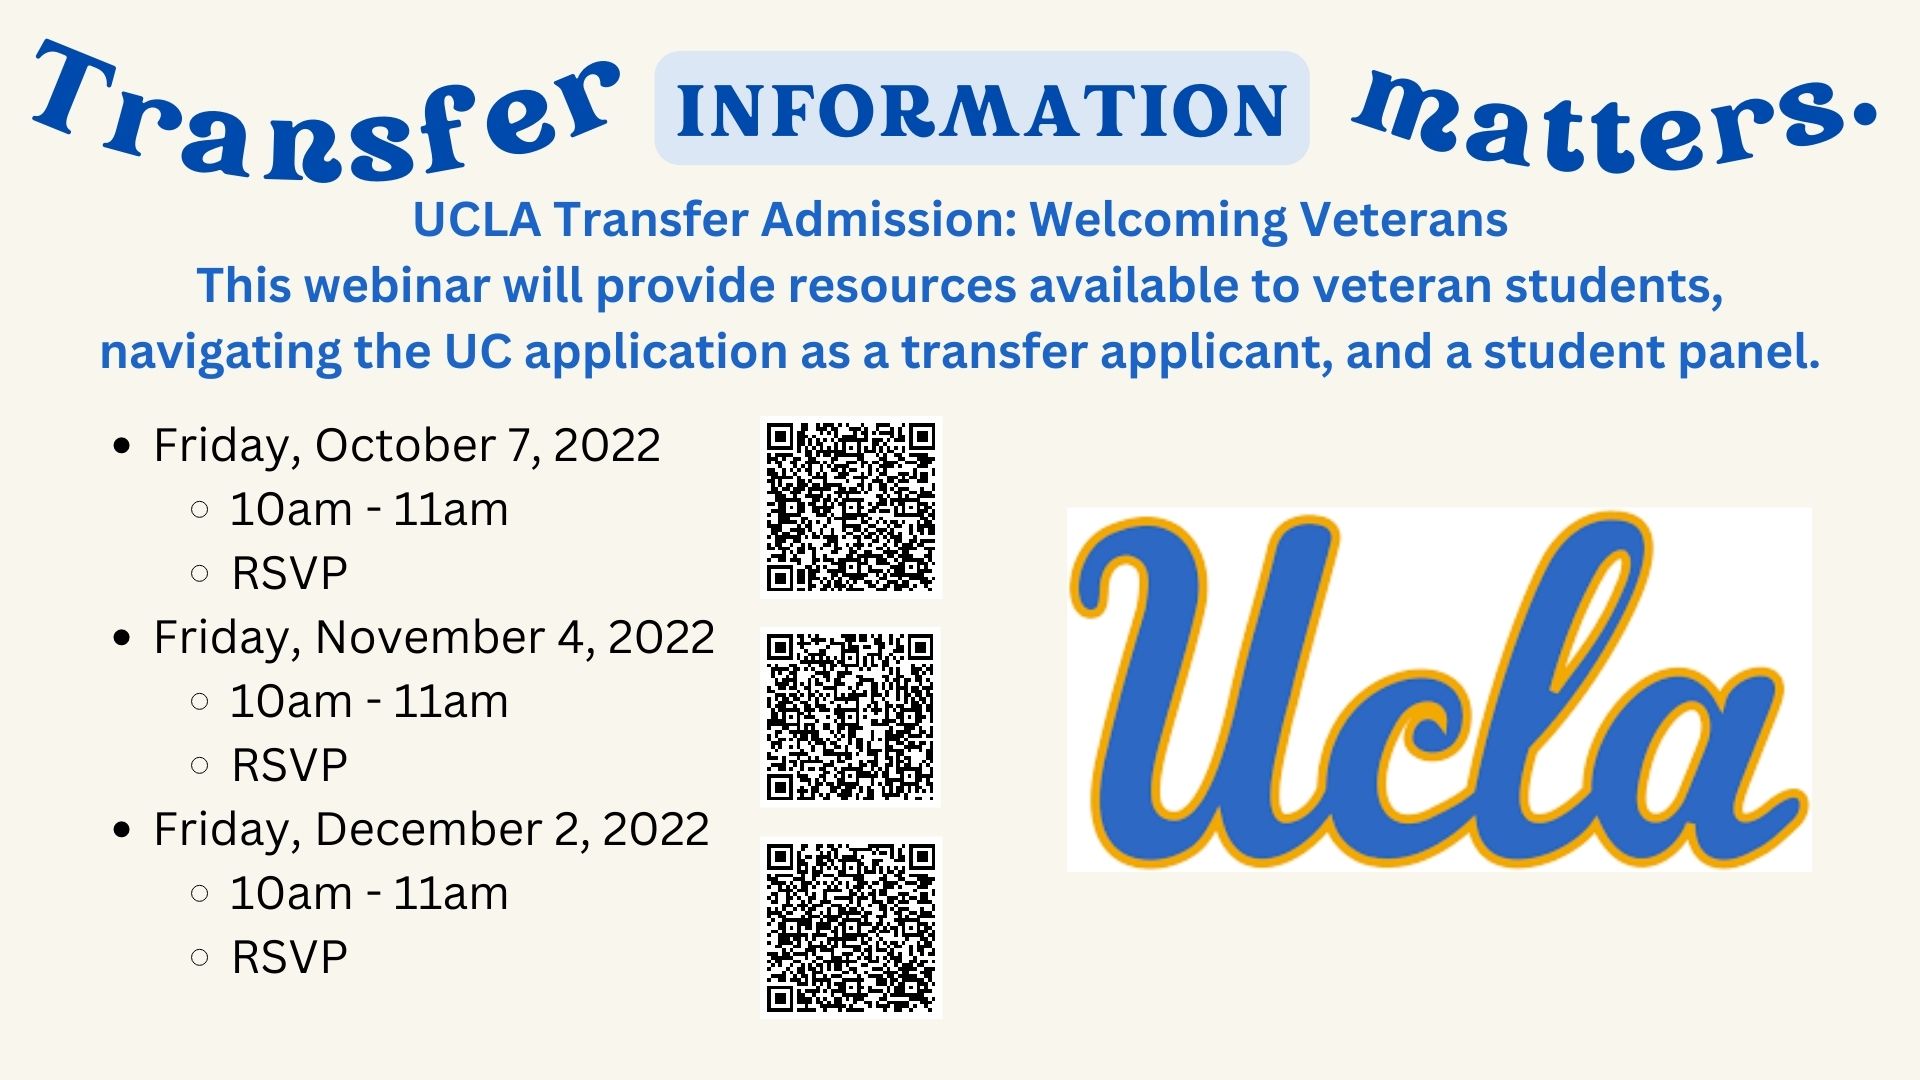 UCLA Transfer Admission: Welcoming Veterans